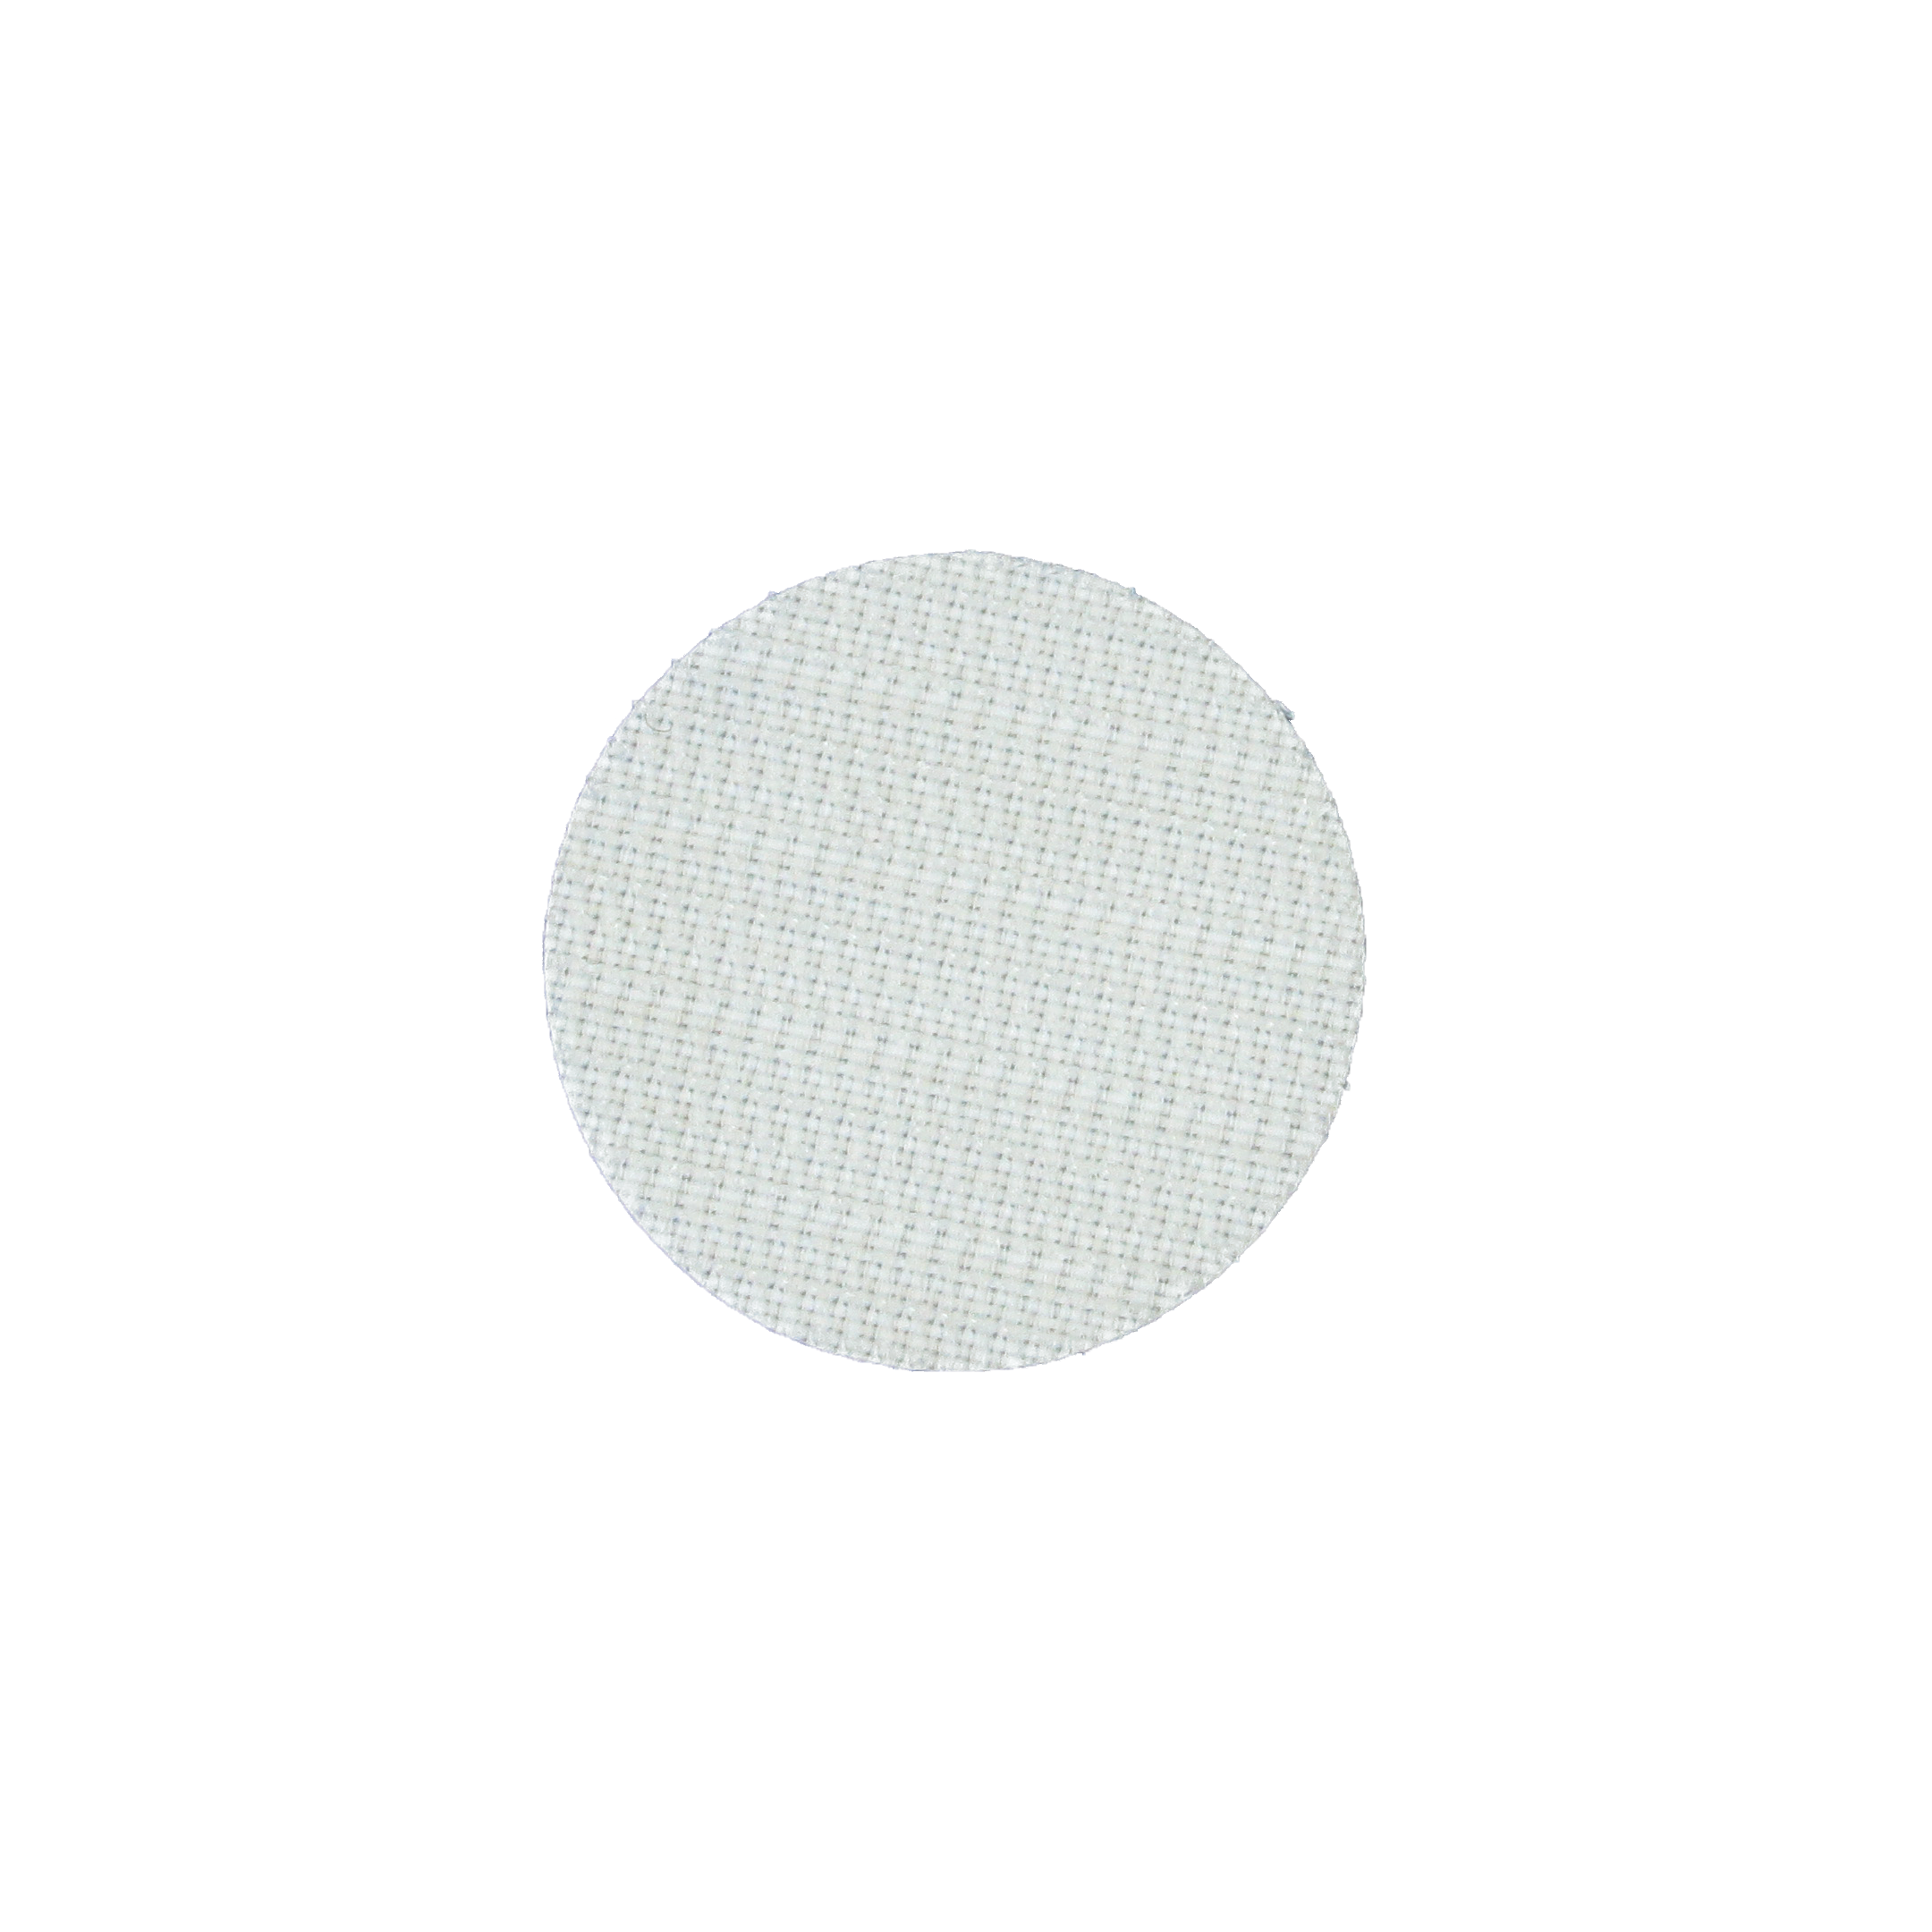 Velcro 22mm x 125 pieces White Dots Hook Only